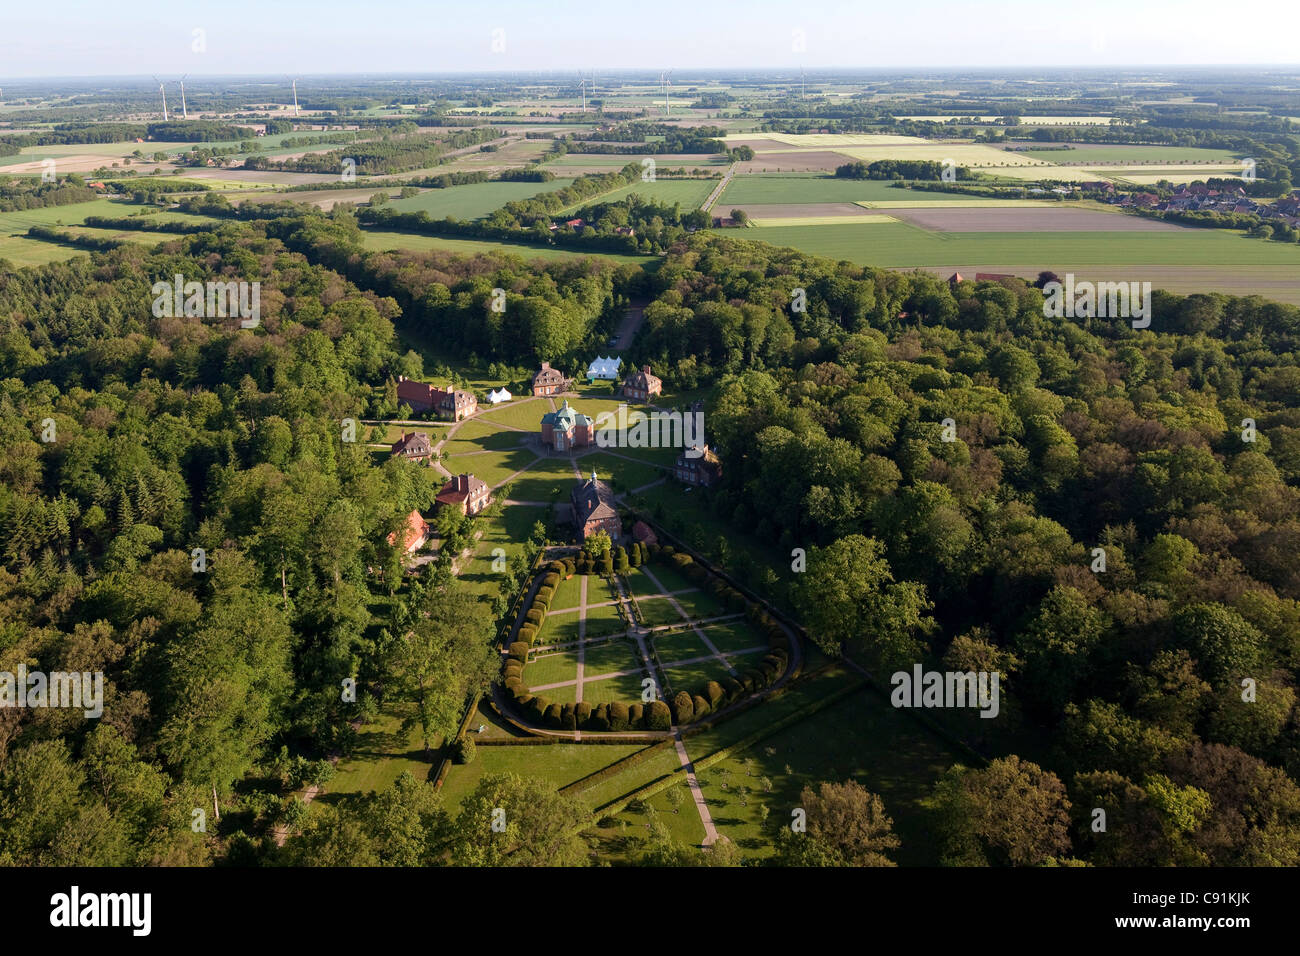 Aerial view of Clemenswerth palace and hunting lodge with park landscape eight pavillions are grouped together in the form of a Stock Photo